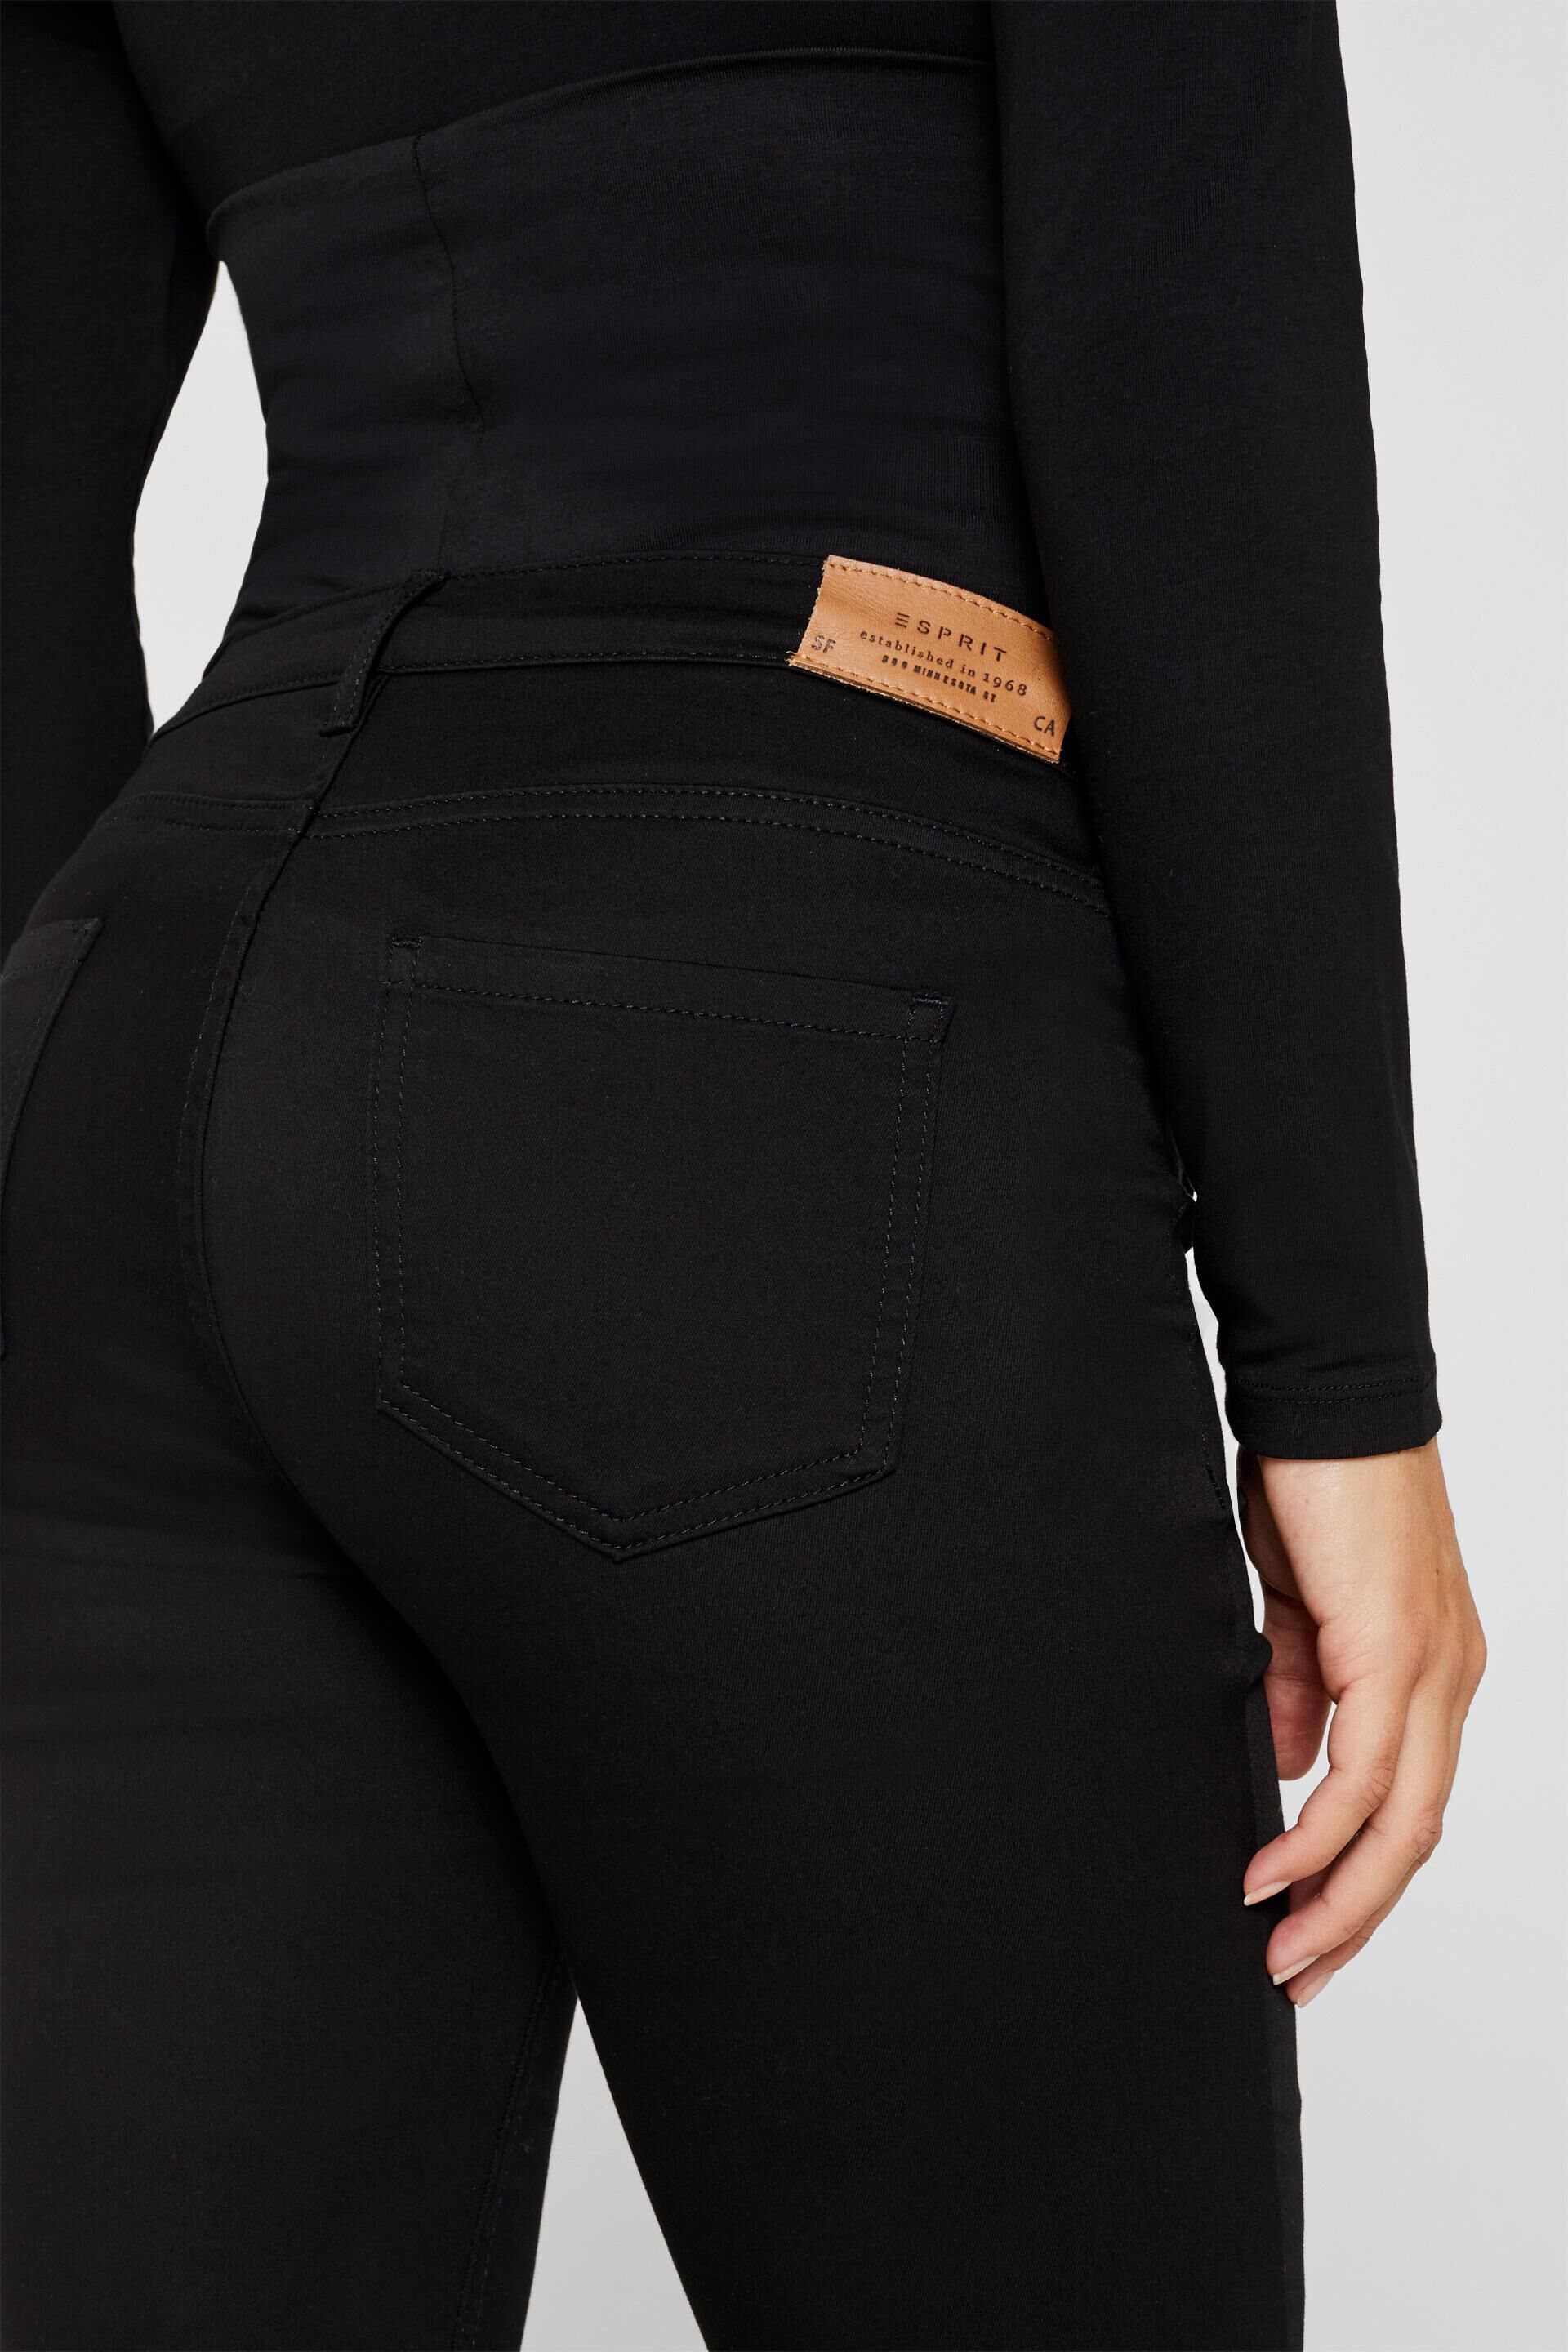 Esprit Stretch an trousers with over-bump waistband